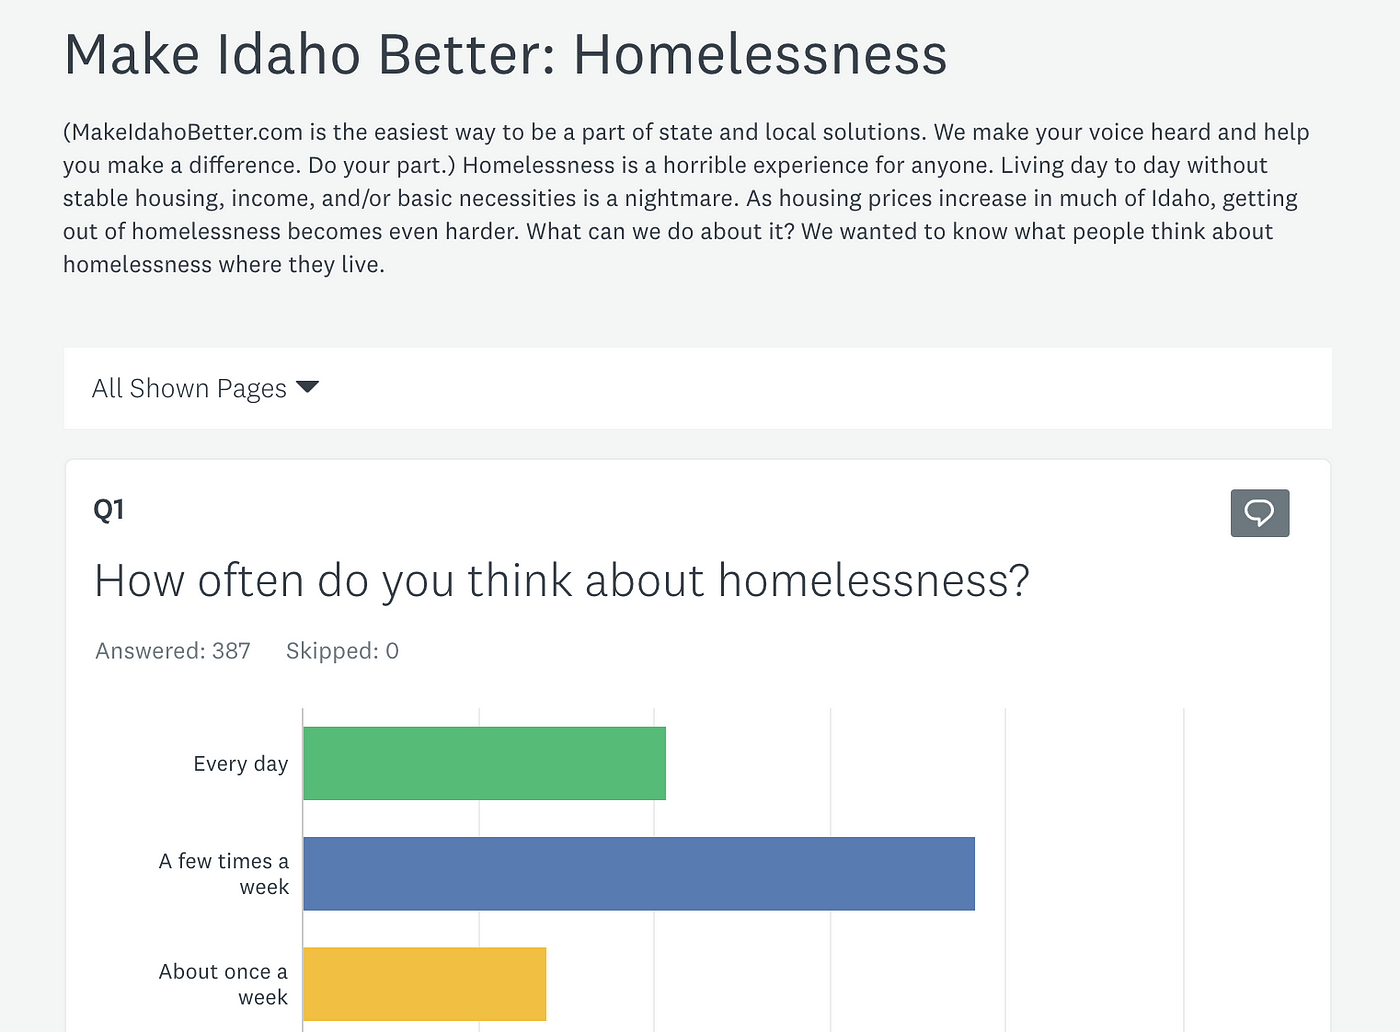 quantitative research questions on homelessness